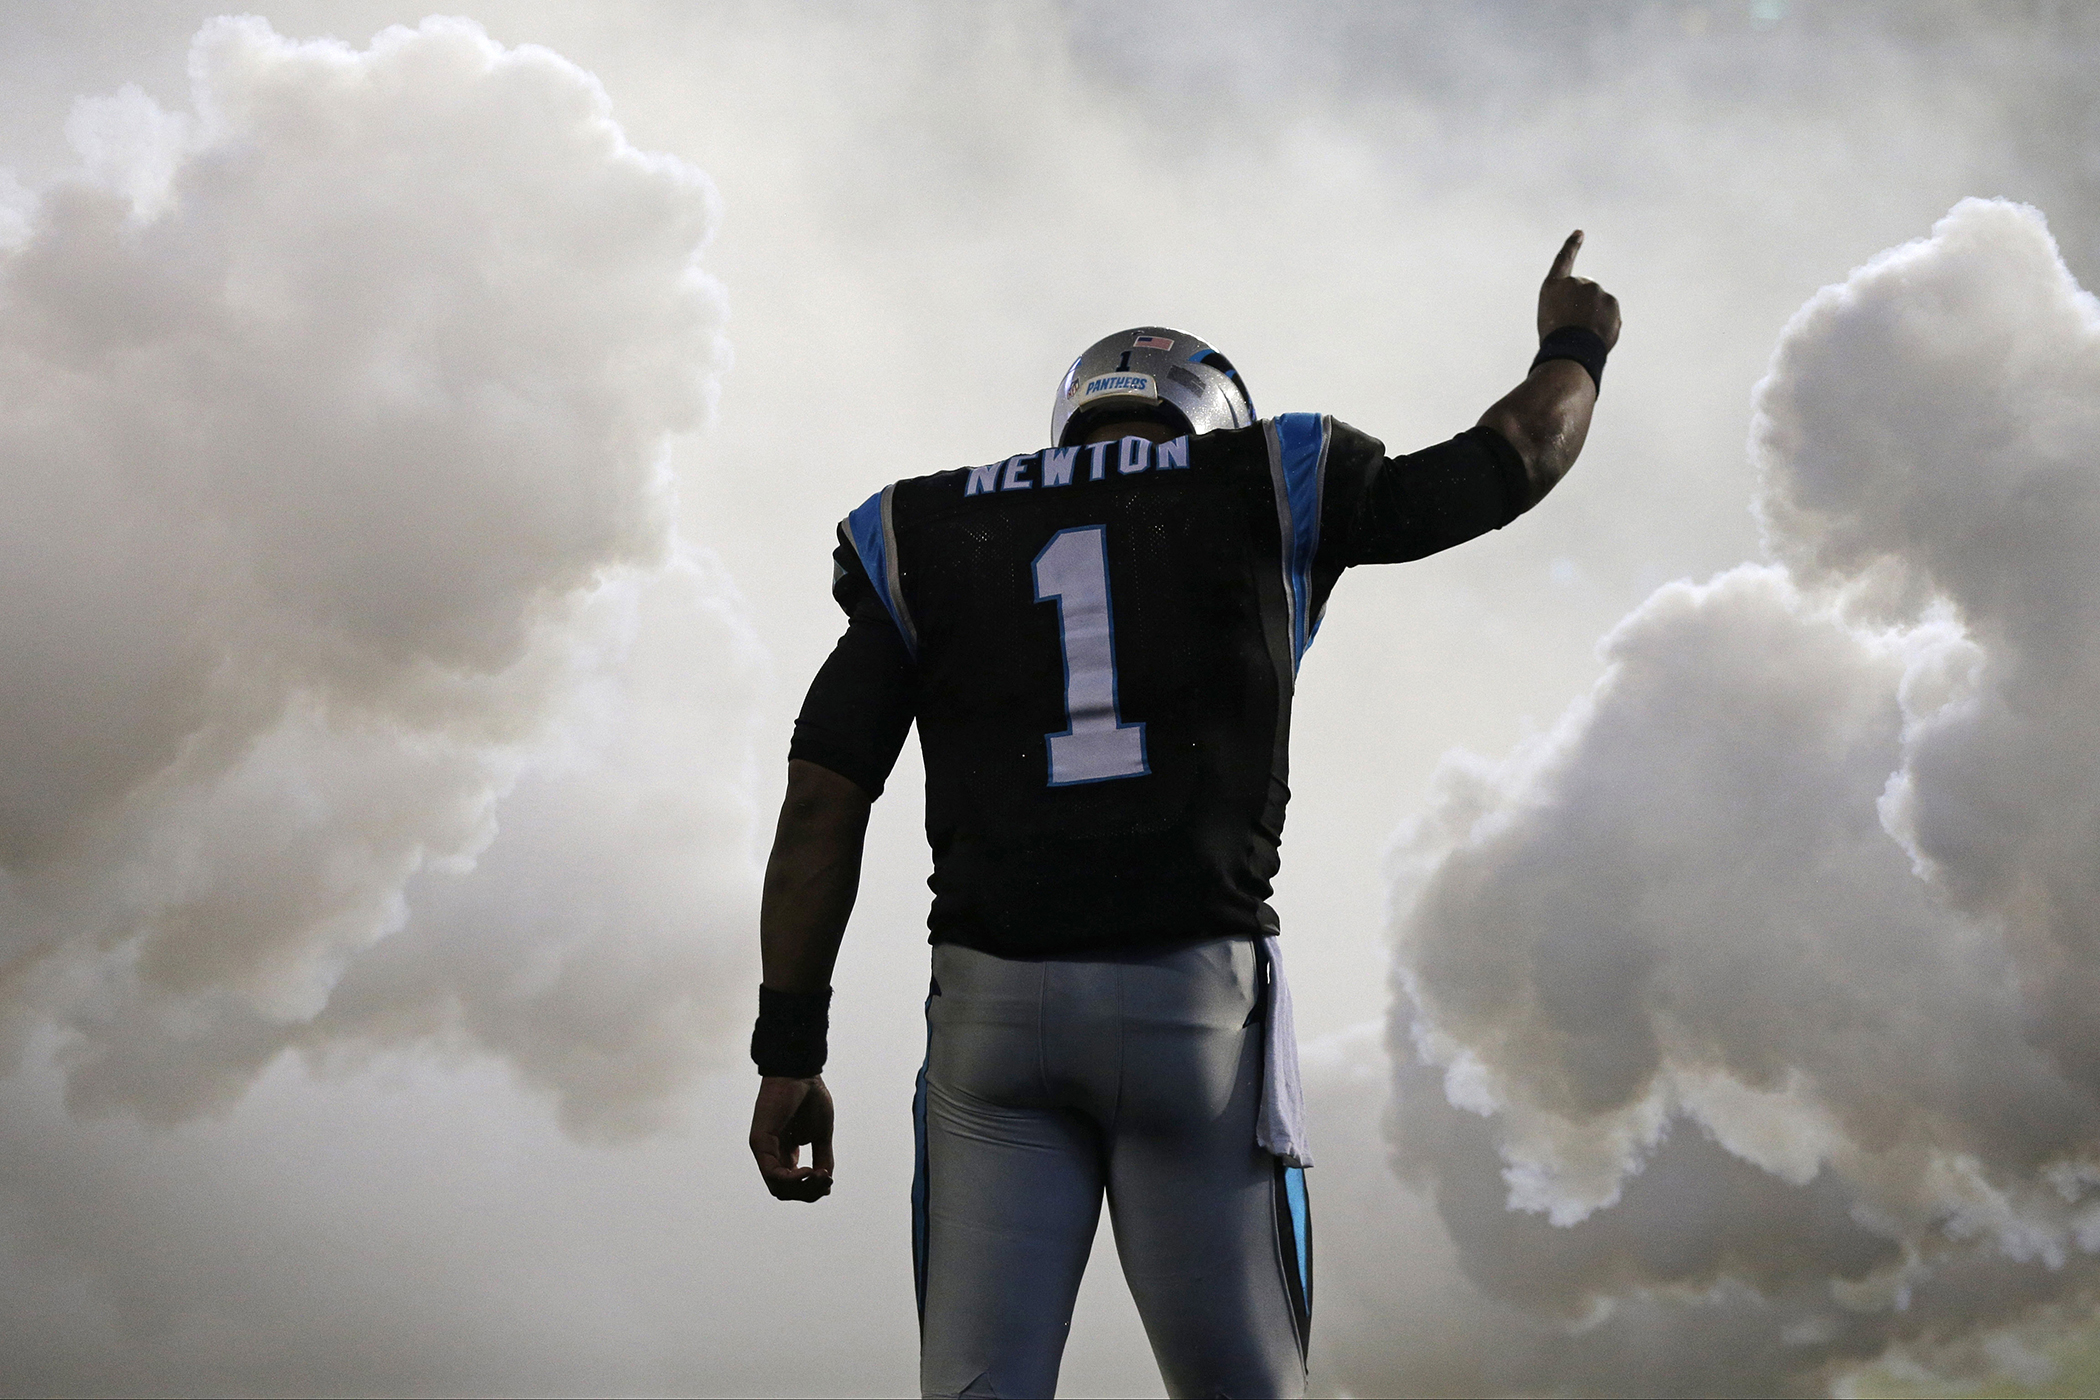 Super Bowl 50: You don't have to like Cam Newton, but you can respect him